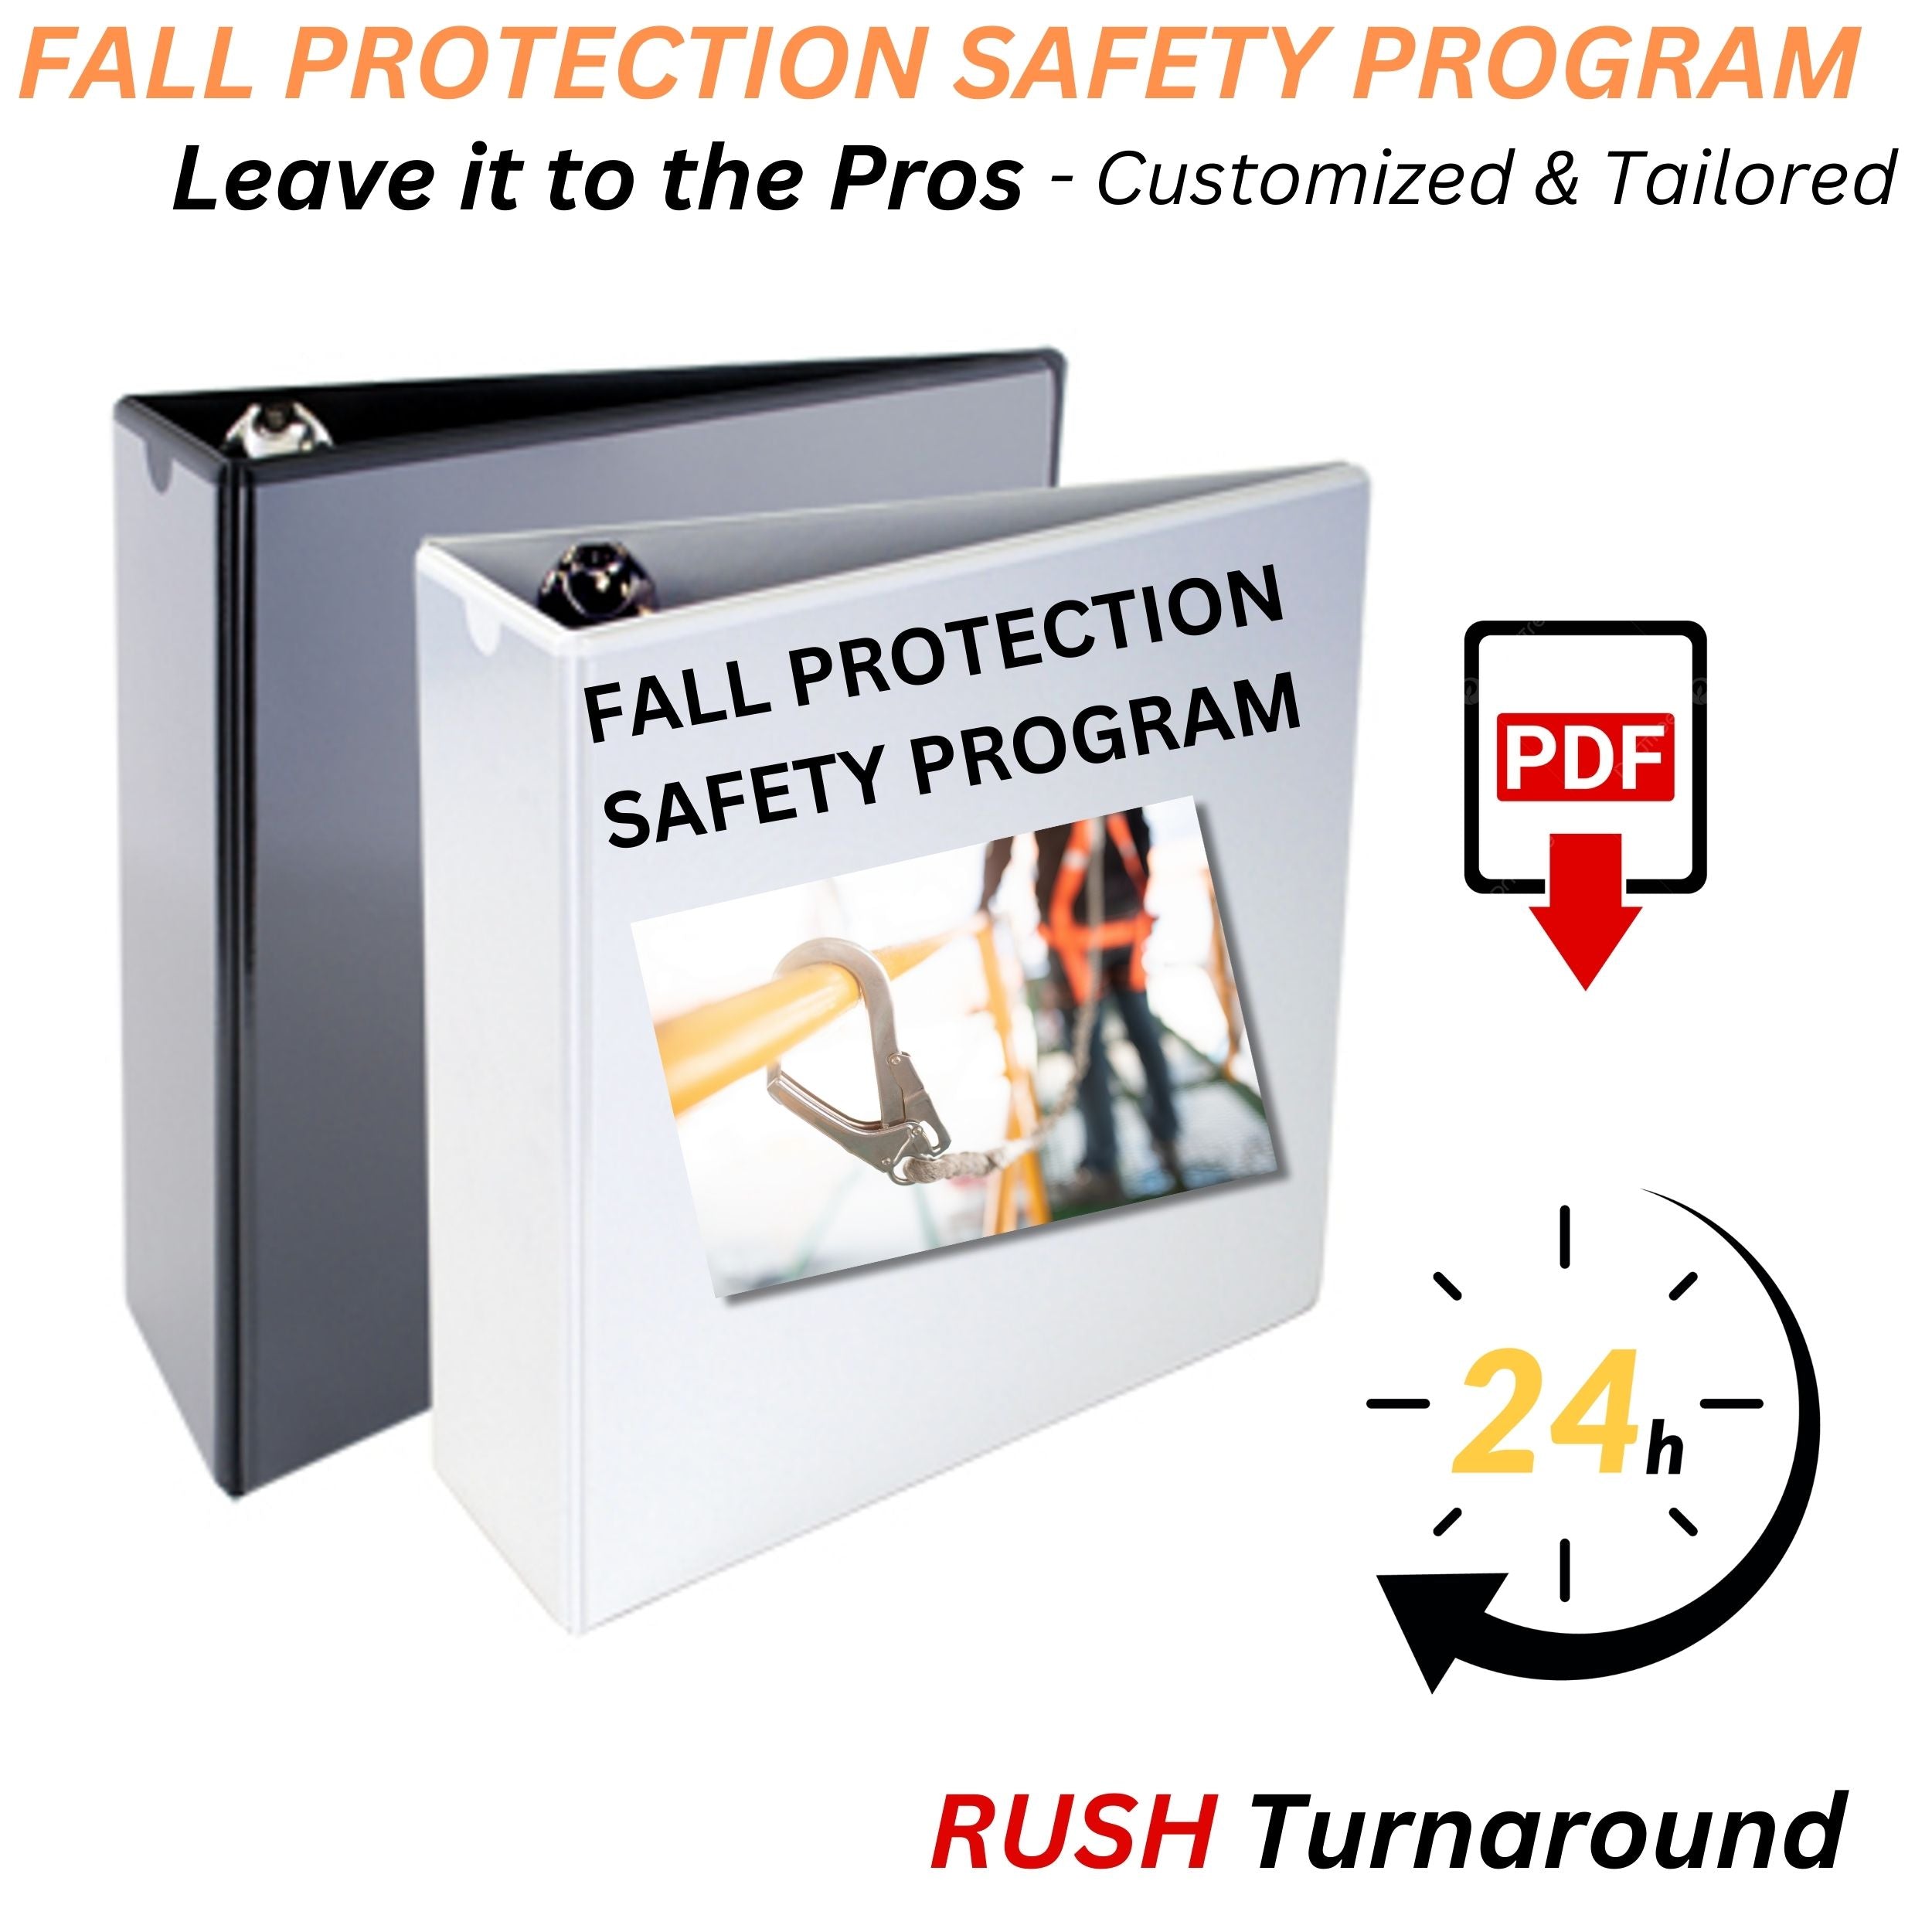 Fall Protection Safety Program